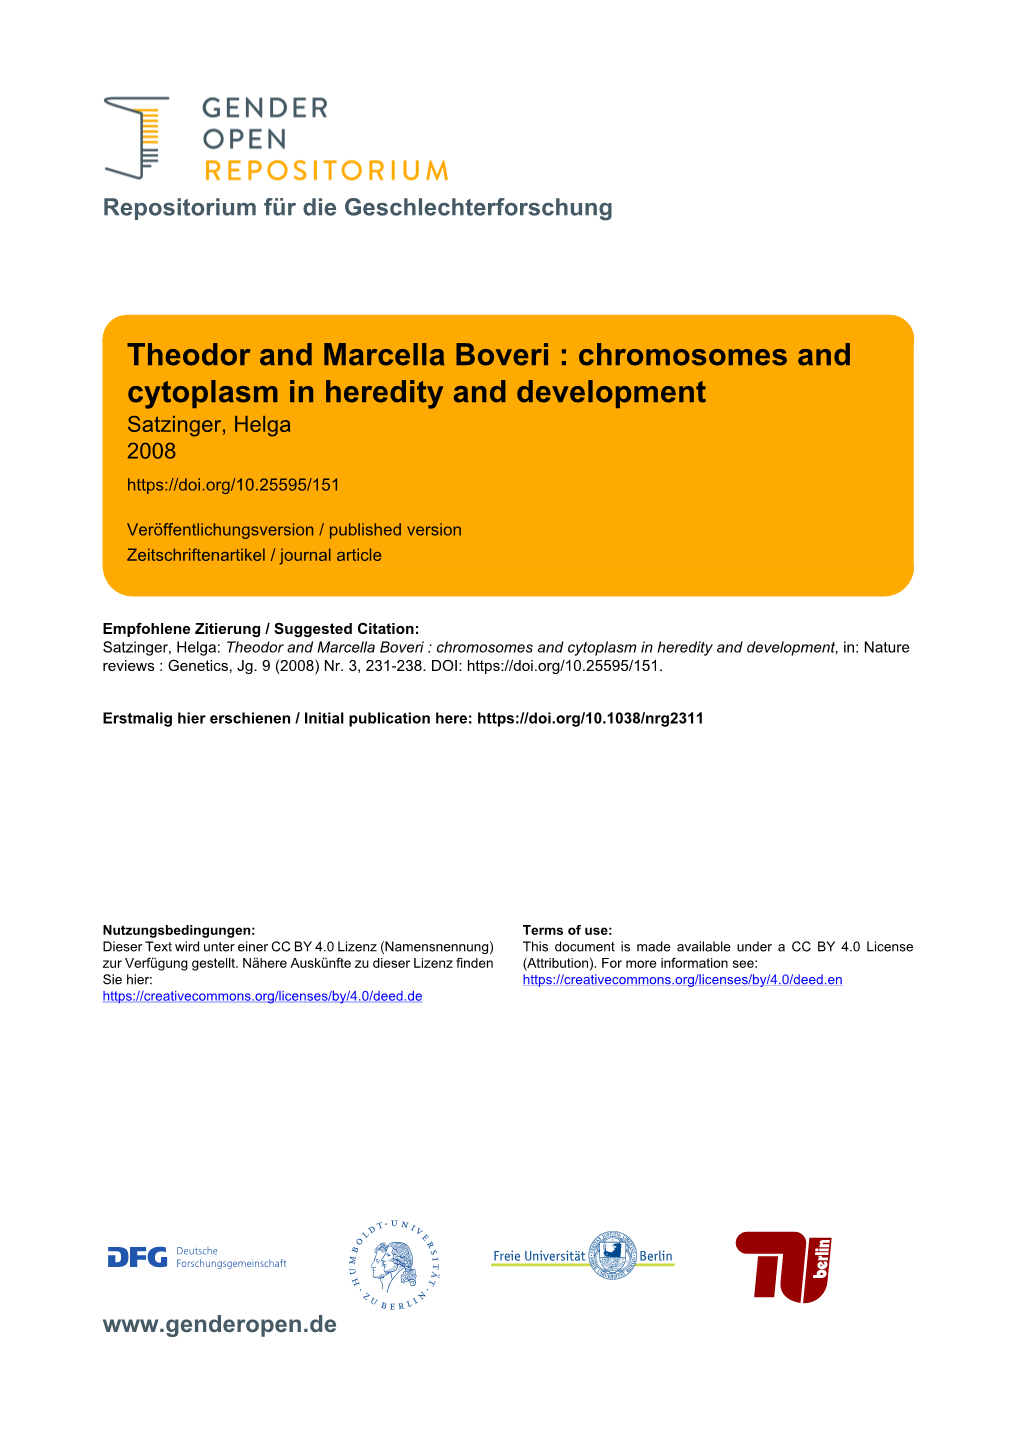 Theodor and Marcella Boveri : Chromosomes and Cytoplasm in Heredity and Development Satzinger, Helga 2008